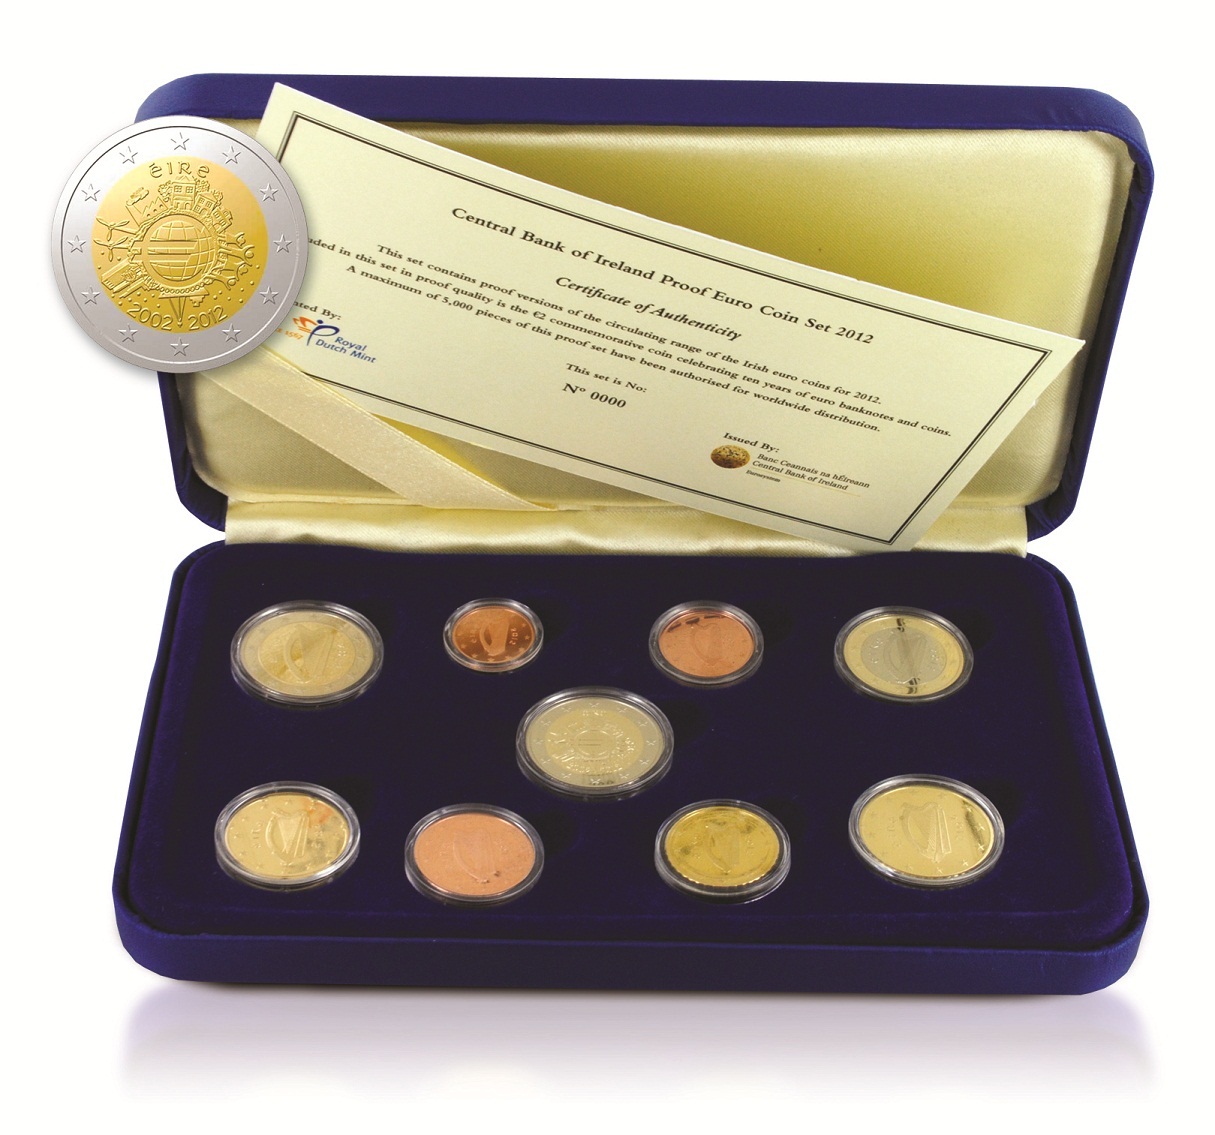 Proof set with certificate> Certificate is always on the best paper and is signed by the royal mint of a country.